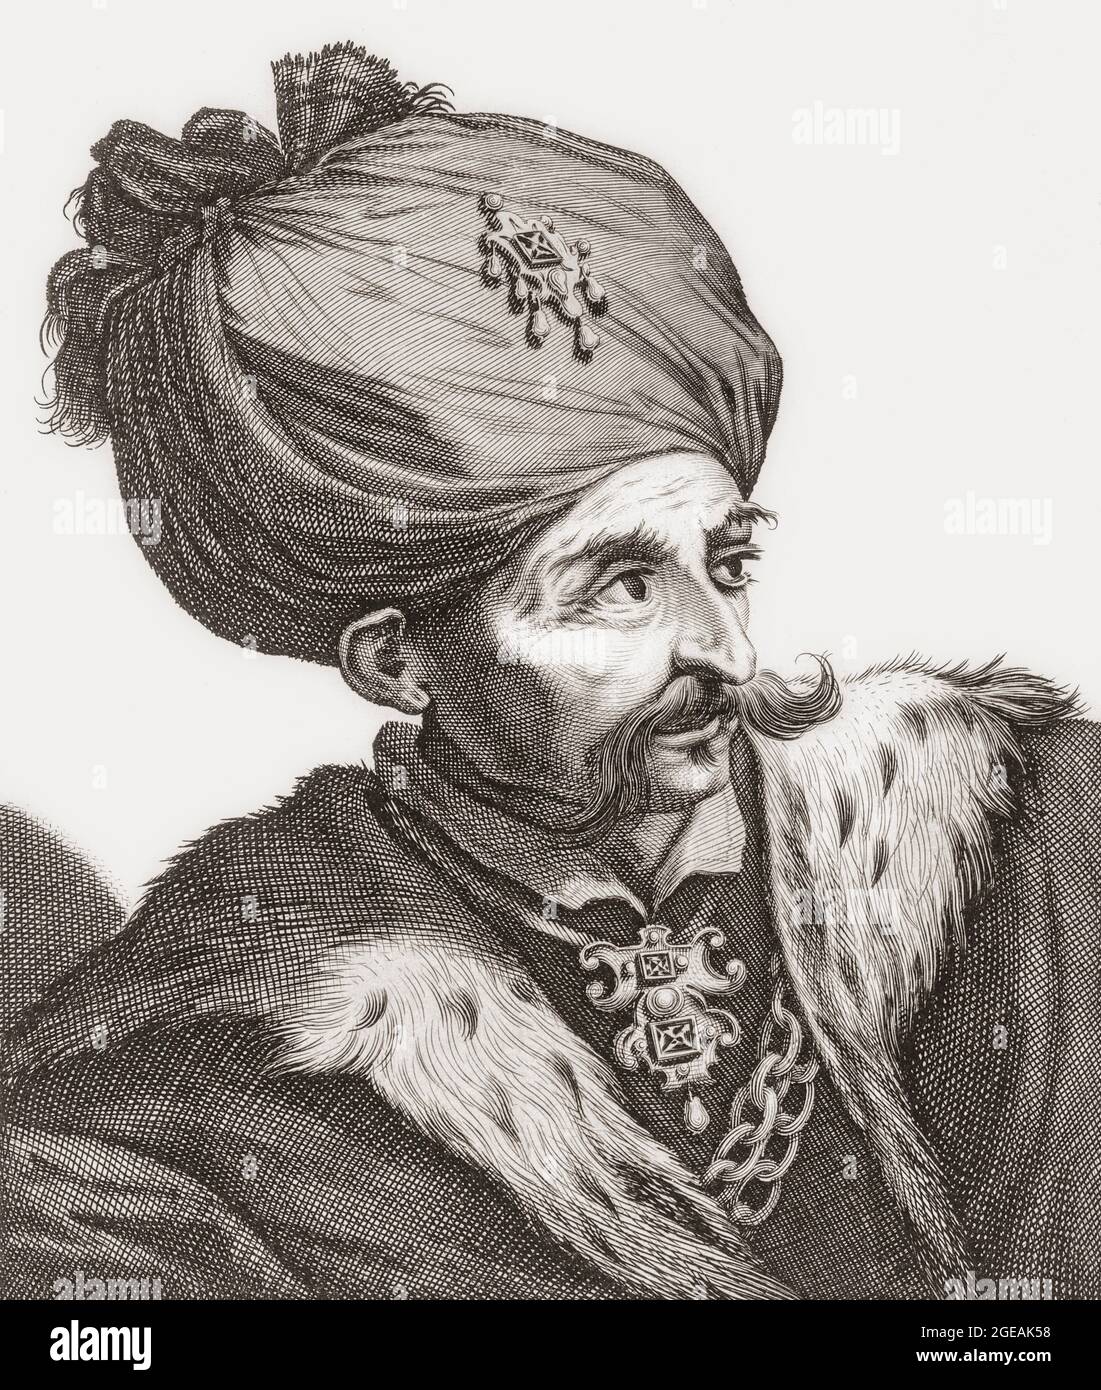 Suleiman I, known as Suleiman the Magnificent, 1494–1566, 10th Sultan of the Ottoman Empire.  After a 17th century work by Jerome David. Stock Photo